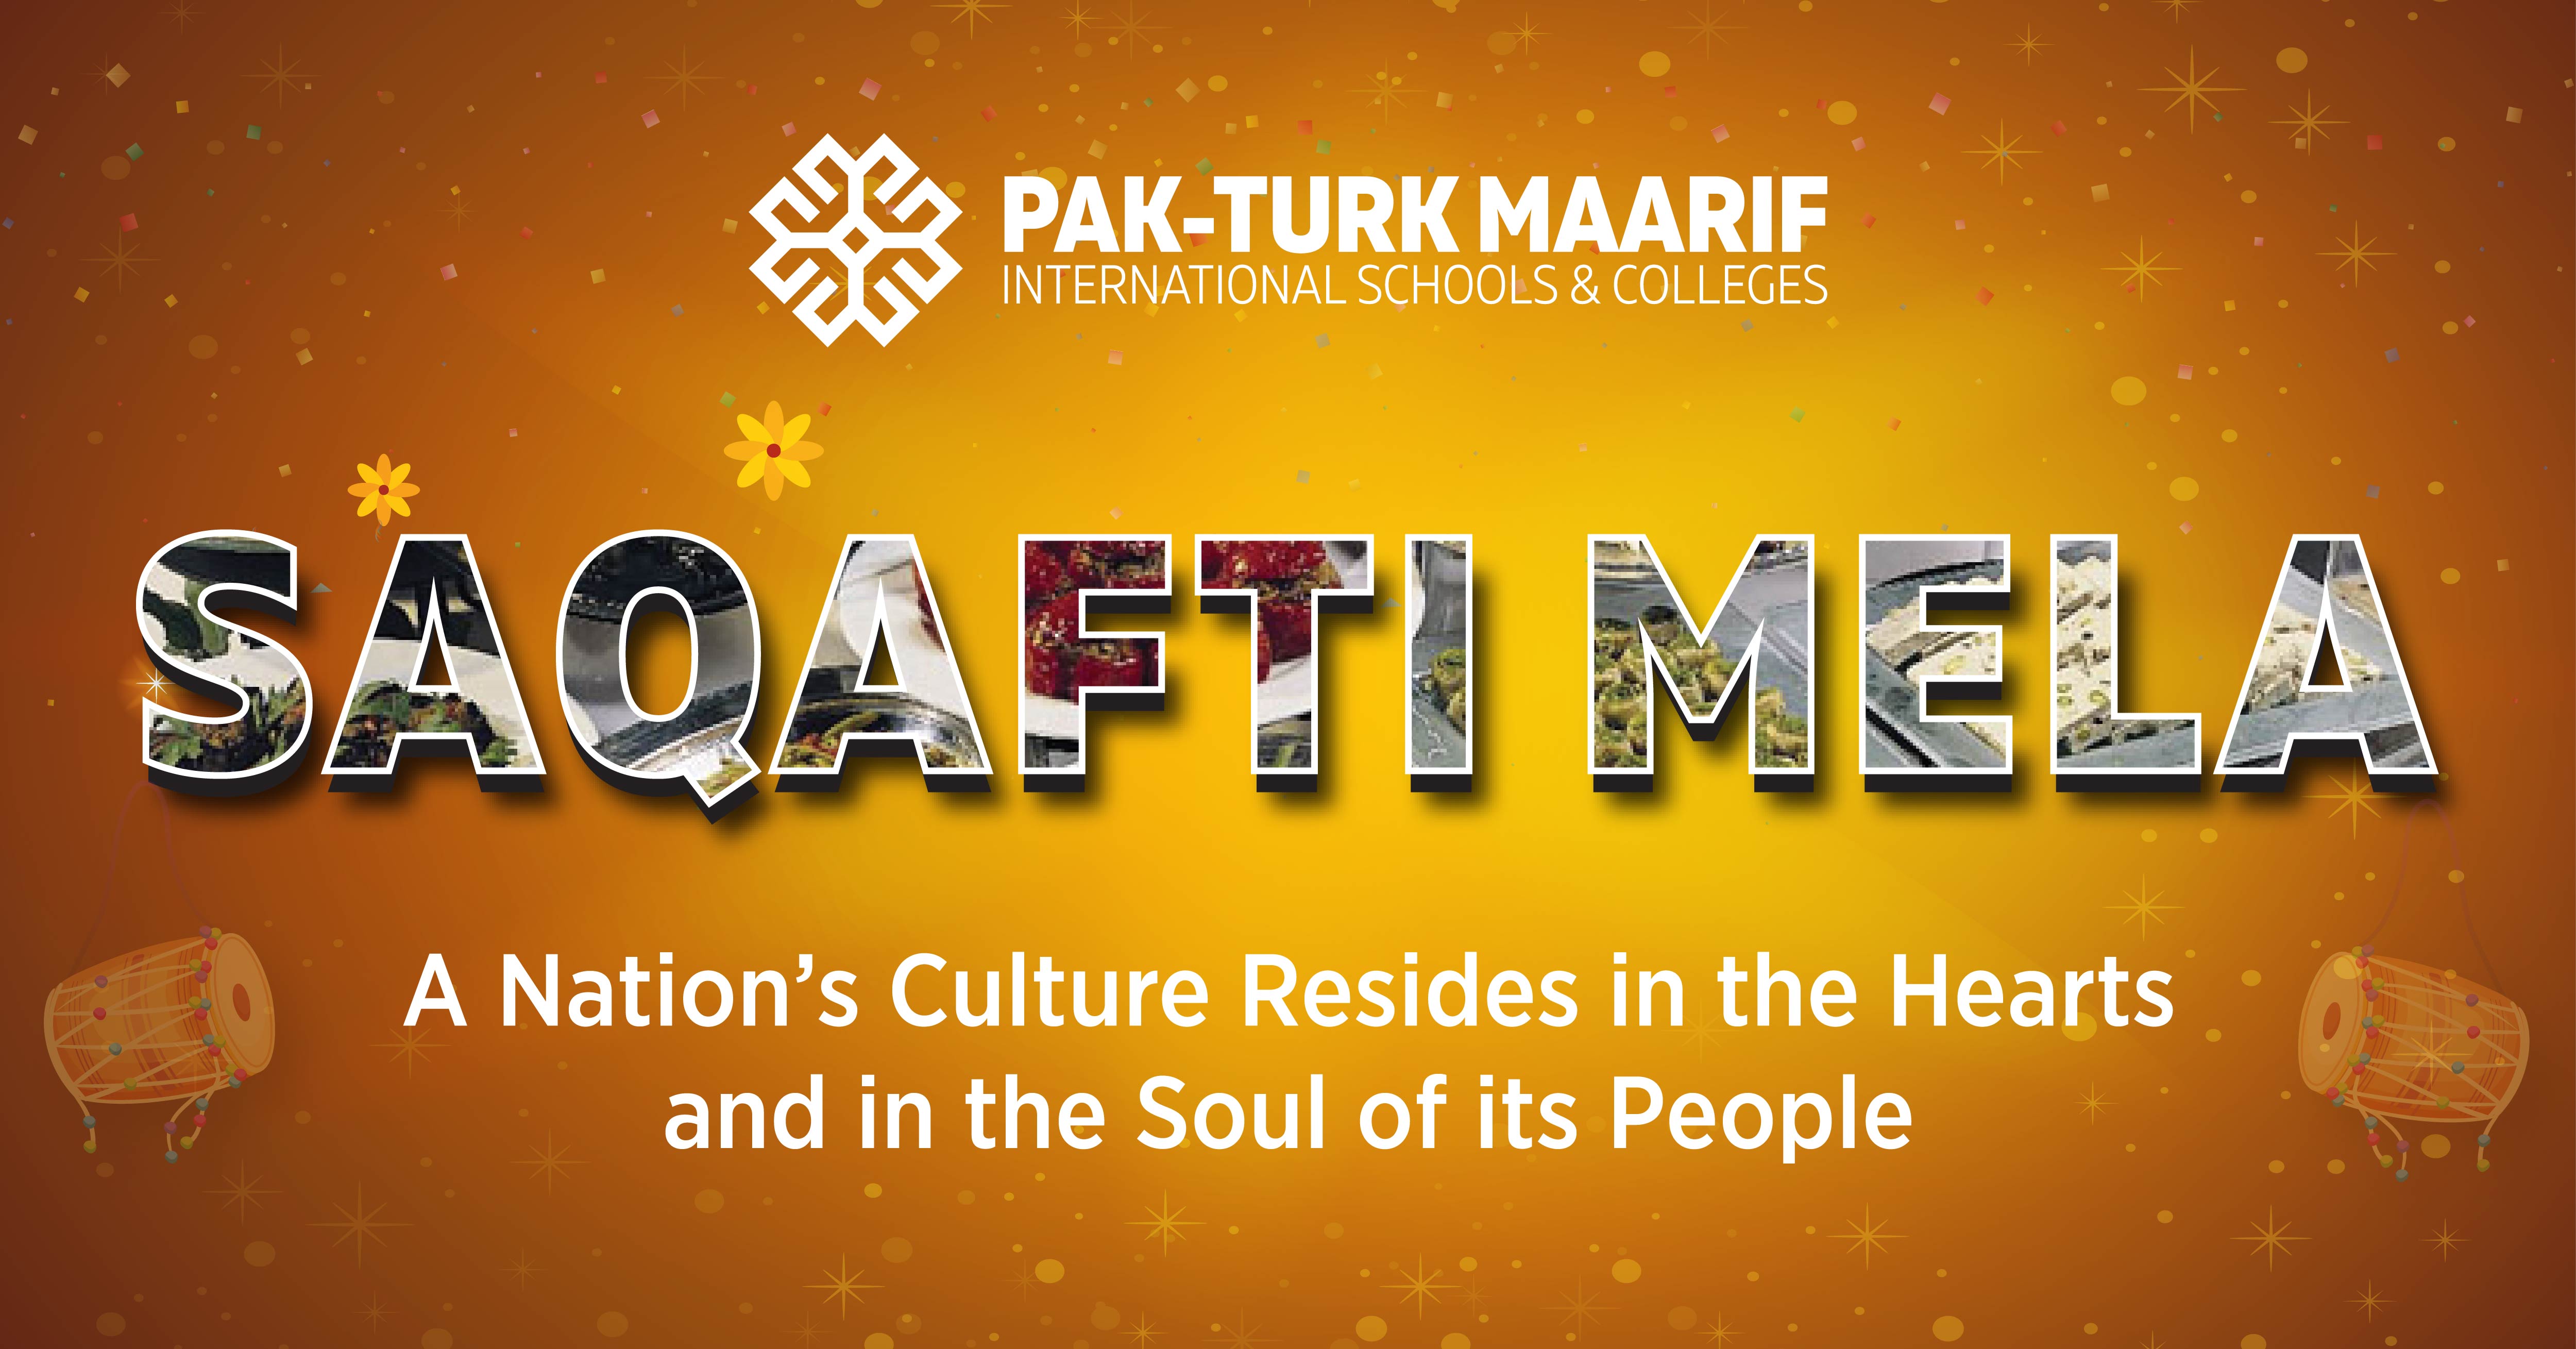 Saqafti Mela - A Nation’s Culture resides in the hearts and souls of its people